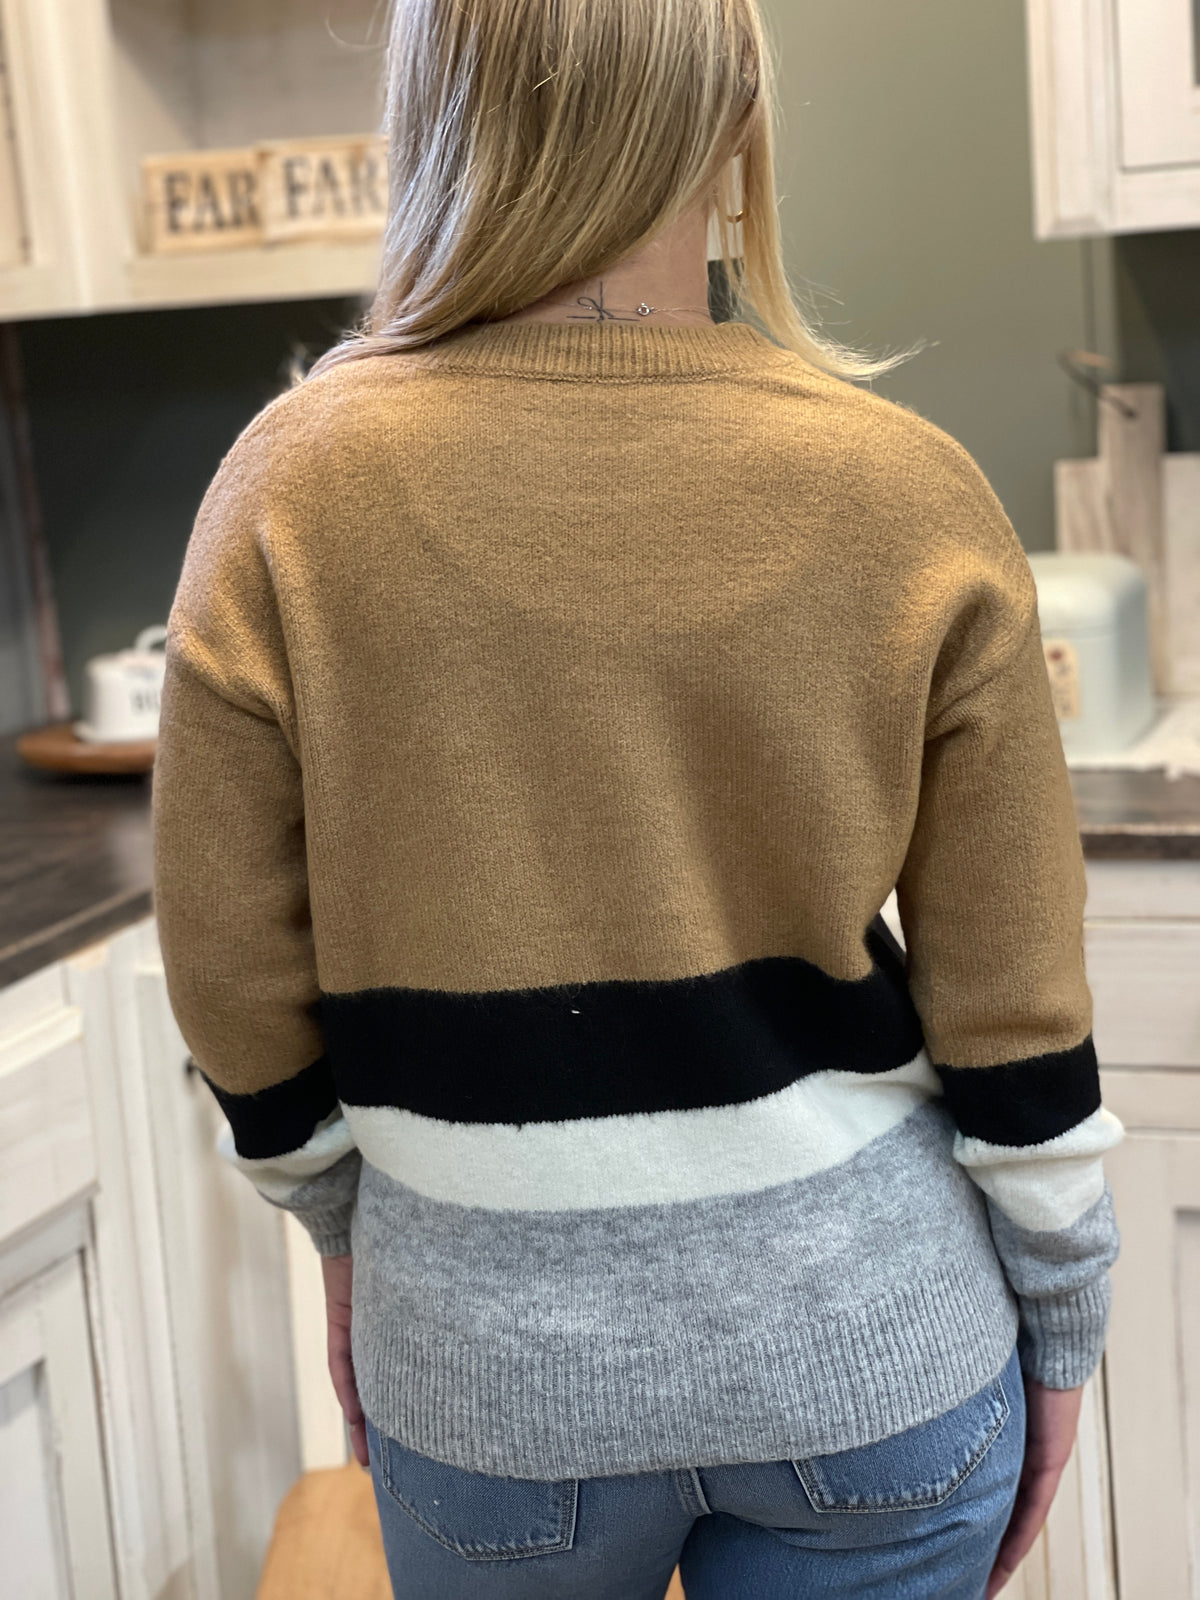 BROWN COLORBLOCK KNIT SWEATER